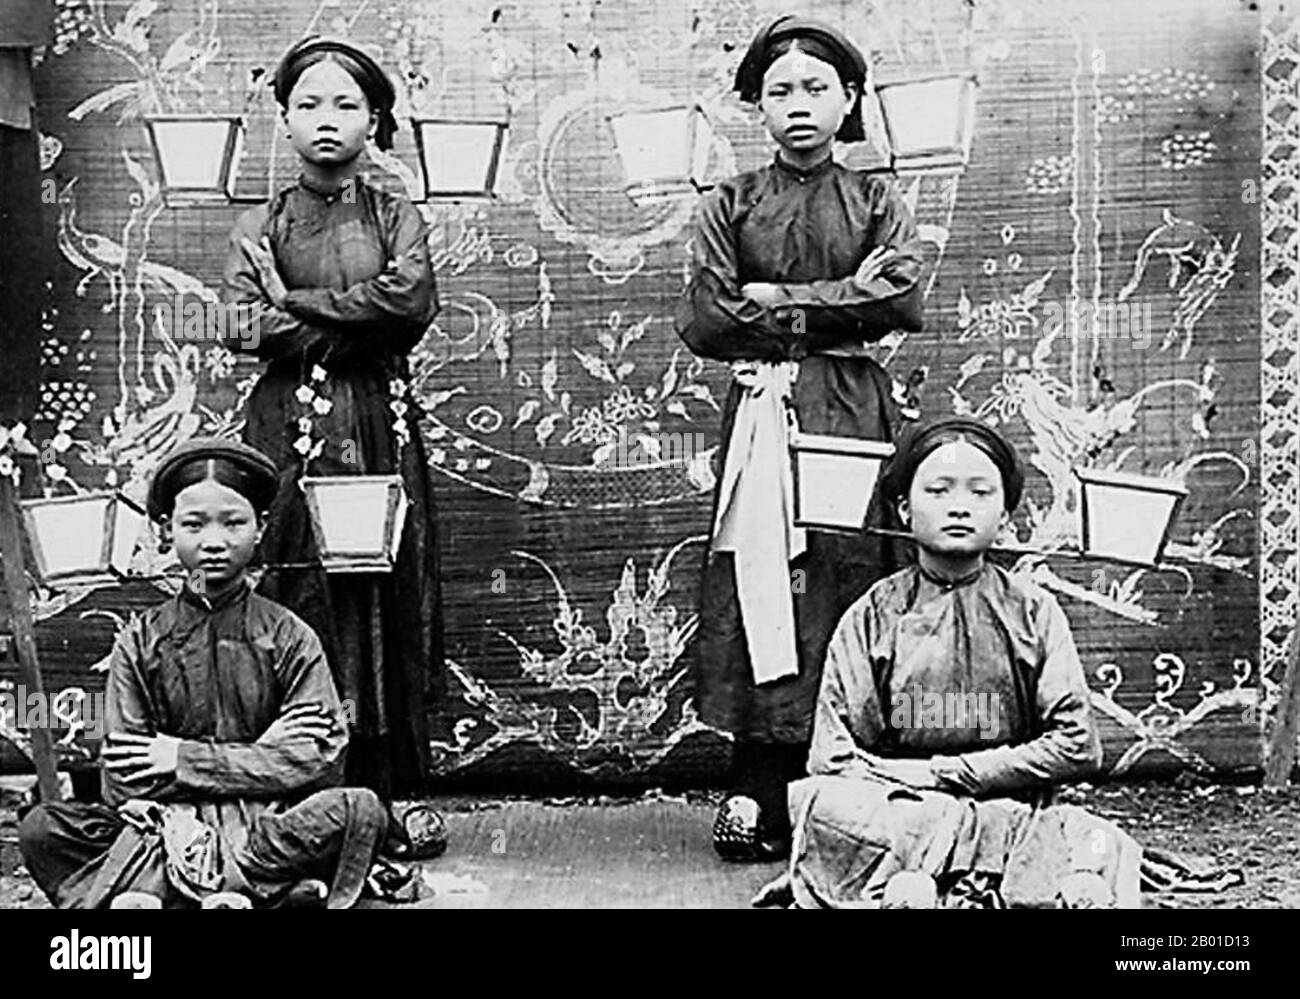 Vietnam: A group of four dancers, Tonkin, c. 1905.  Ca trù, also known as hát cô đầu or hát nói, is a genre of musical storytelling from northern Vietnam, performed by a featuring female vocalist. It combined entertaining wealthy clients with performing religious songs for the royal court.  Traditional Vietnamese dance includes several different forms. These include: dance as performed in Vietnamese theatre and opera, dances performed at festivals, and royal dances of the imperial court. Dance is thought to have been an integral part of Vietnamese culture since ancient times. Stock Photo